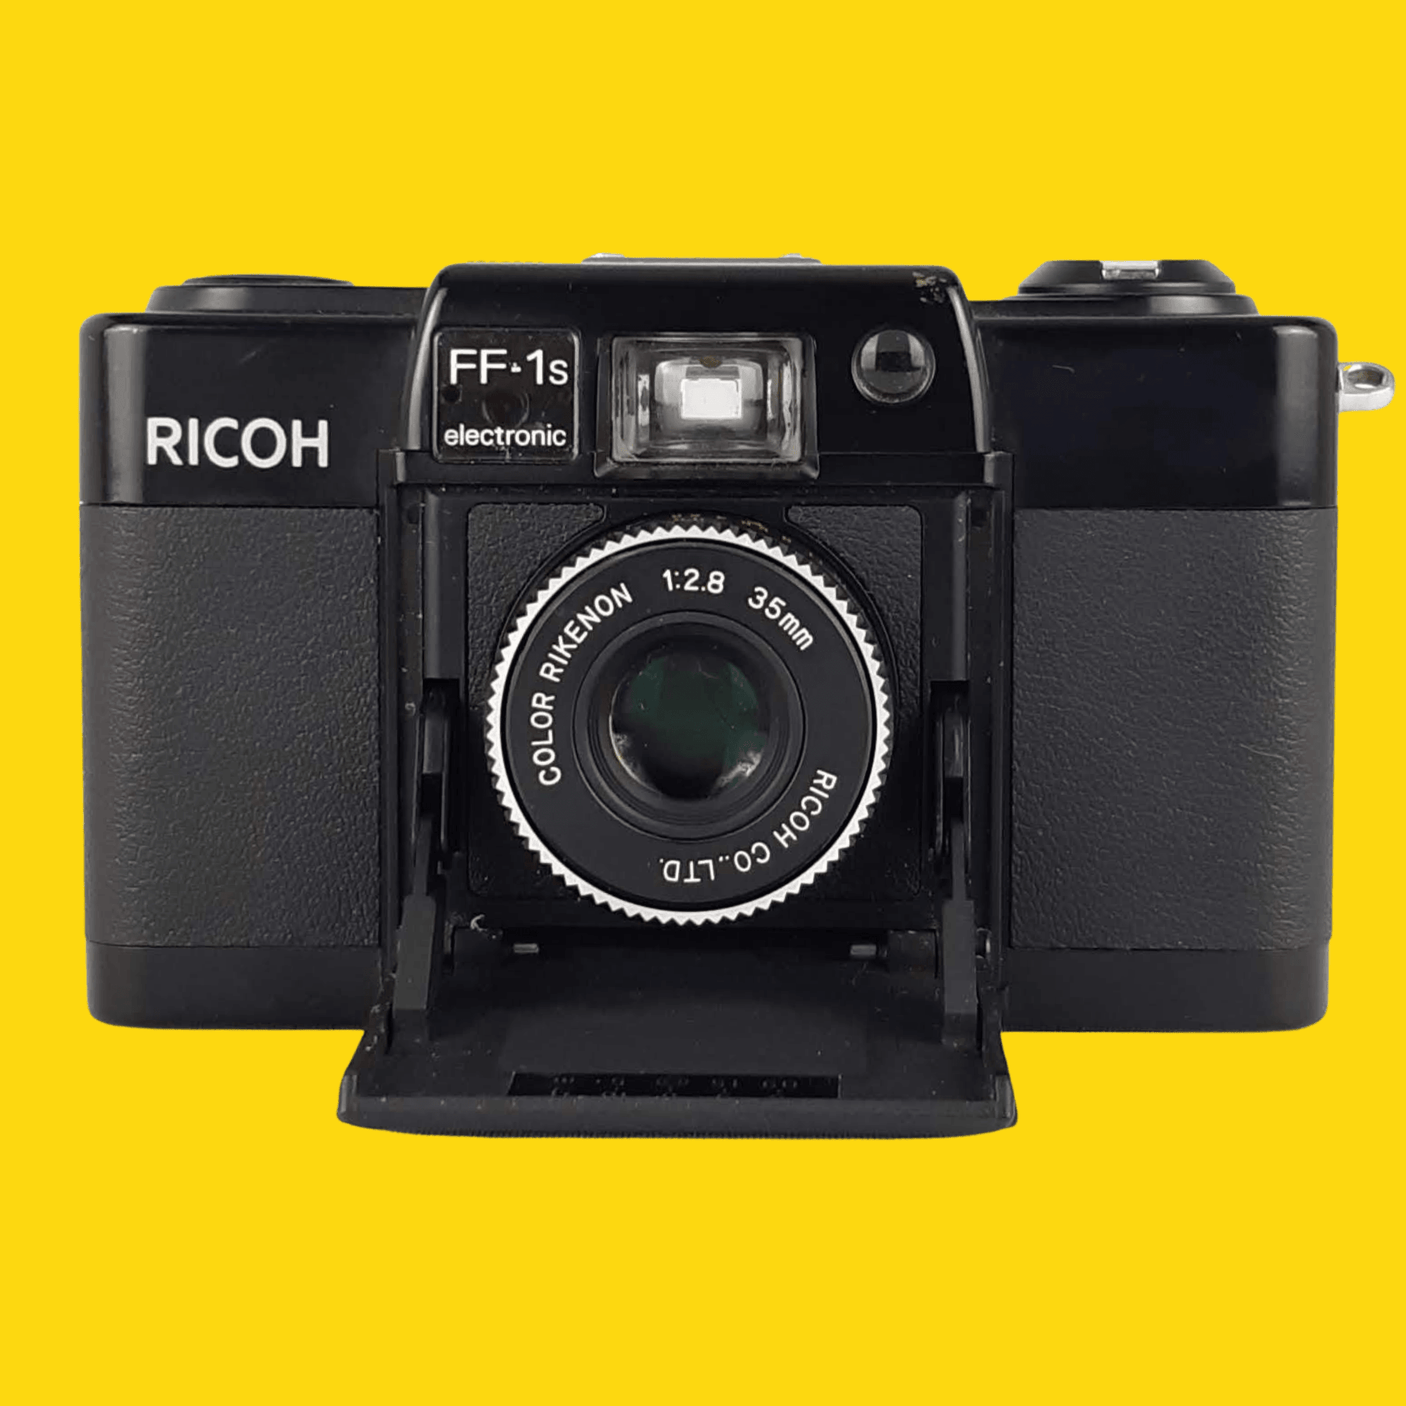 Ricoh FF-1s 35mm Film Camera Point and Shoot